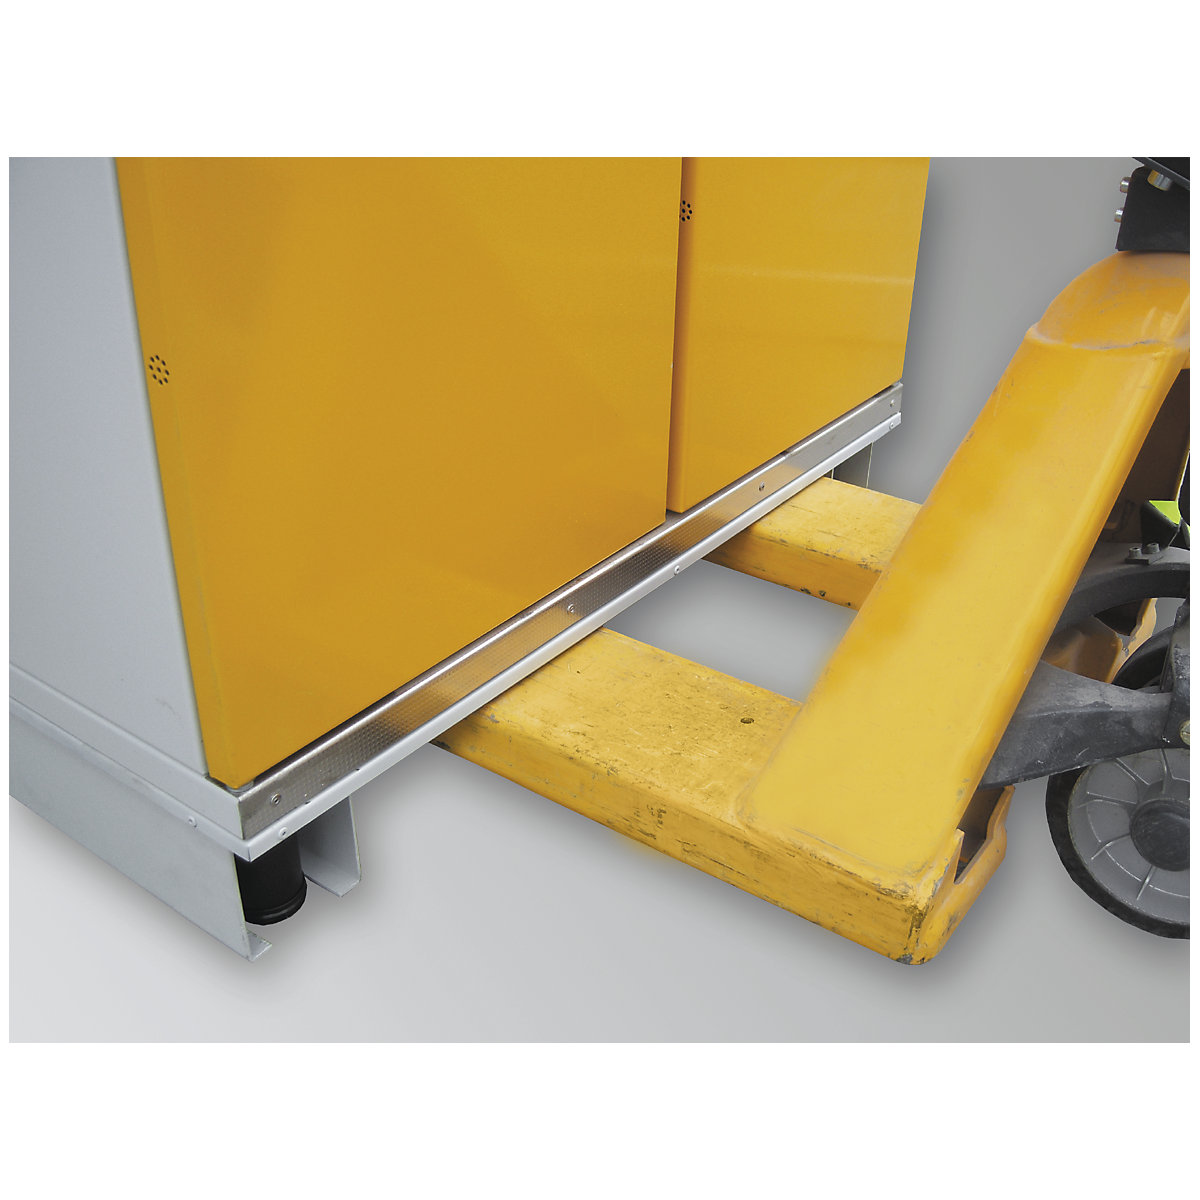 Forklift accessible plinth as accessory